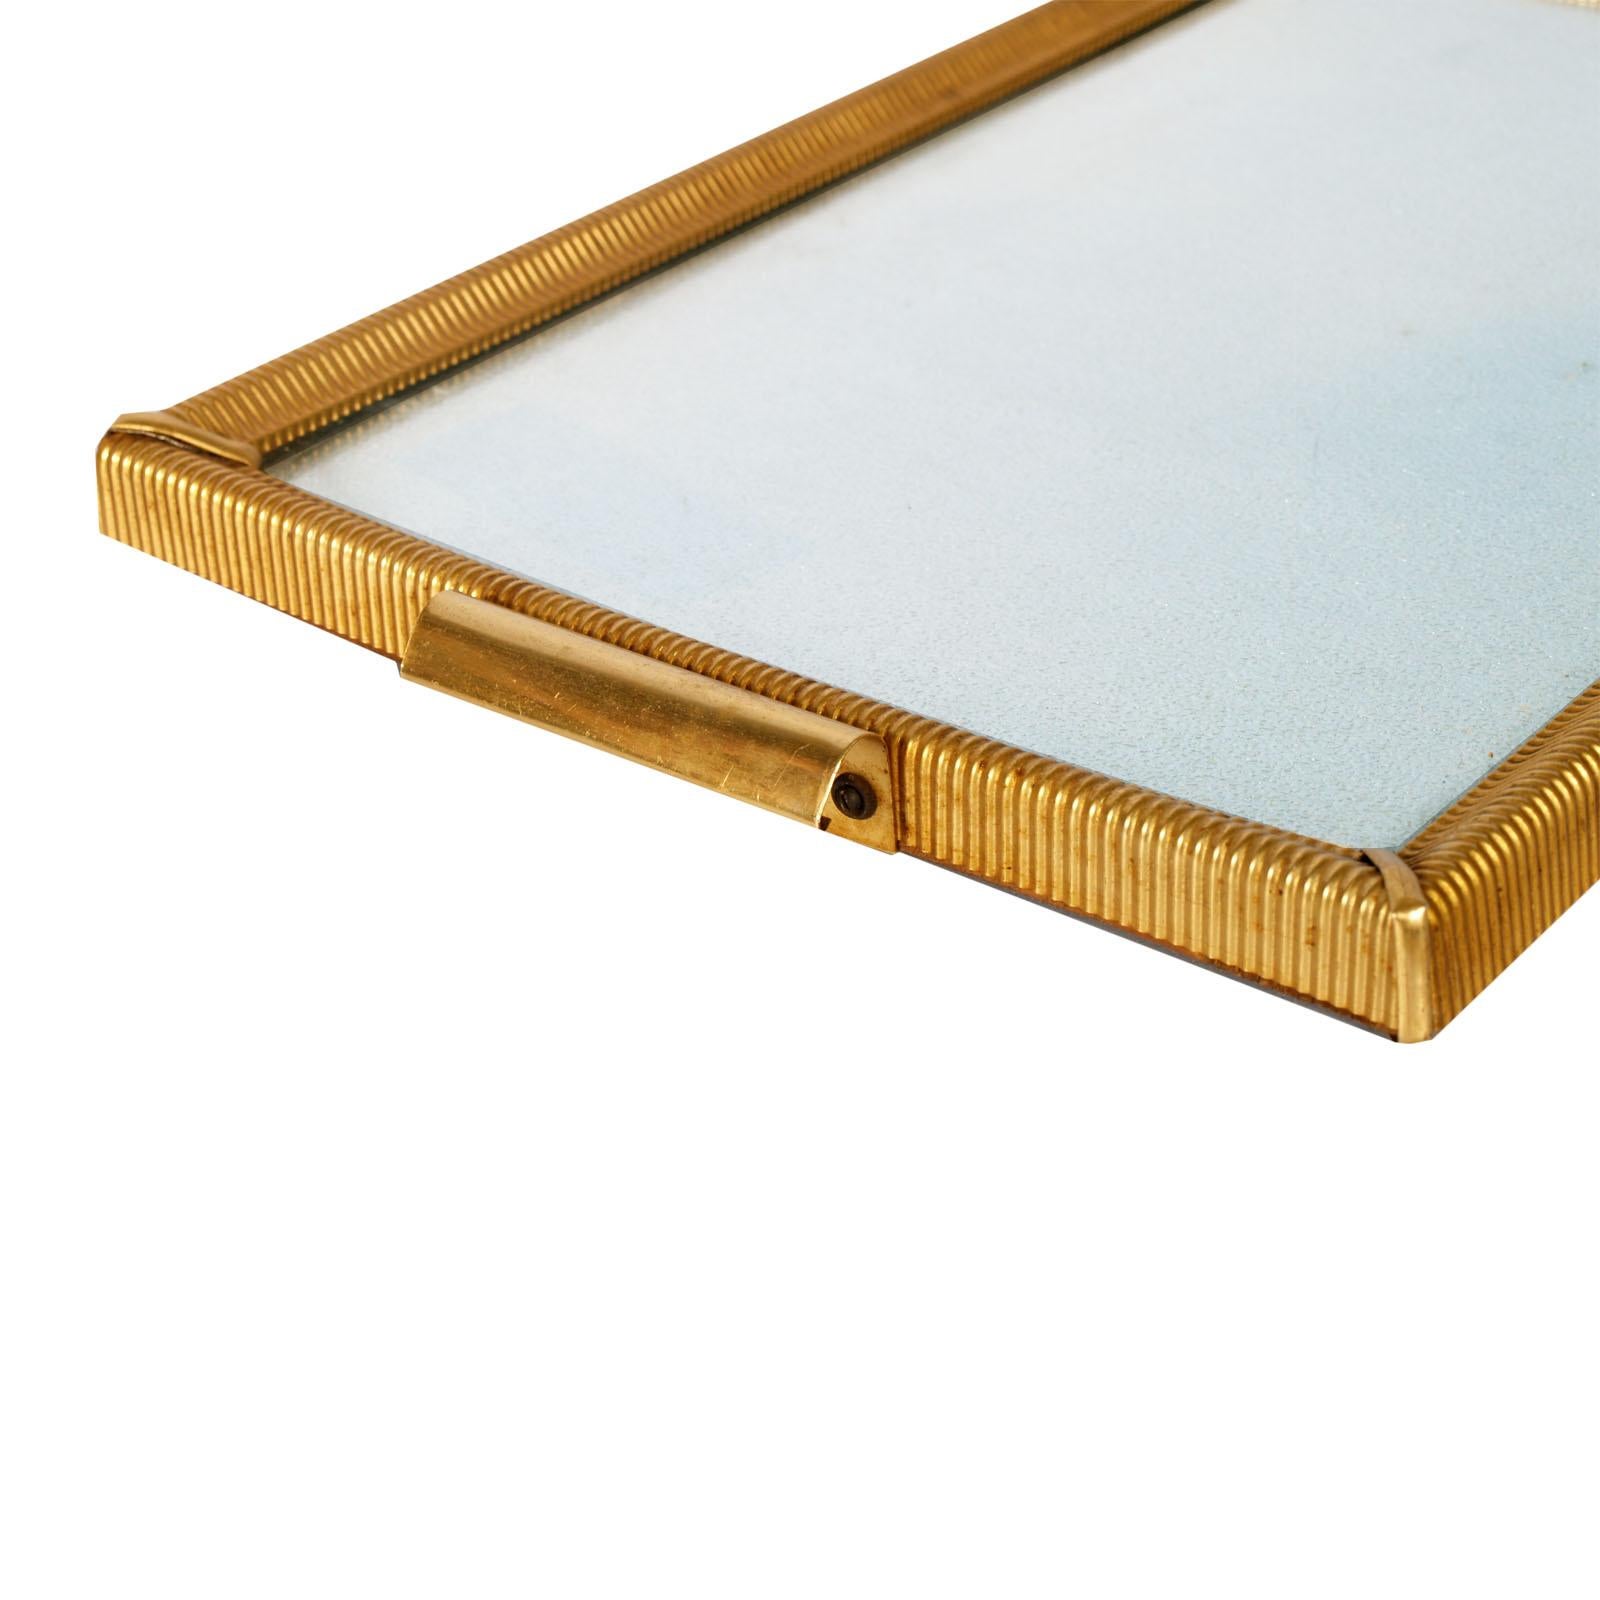 Art Decò nice serving tray, structure in gilt metal, with top cristall on a light blue embossed metal paper. Structure and the bottom of the tray in wood.